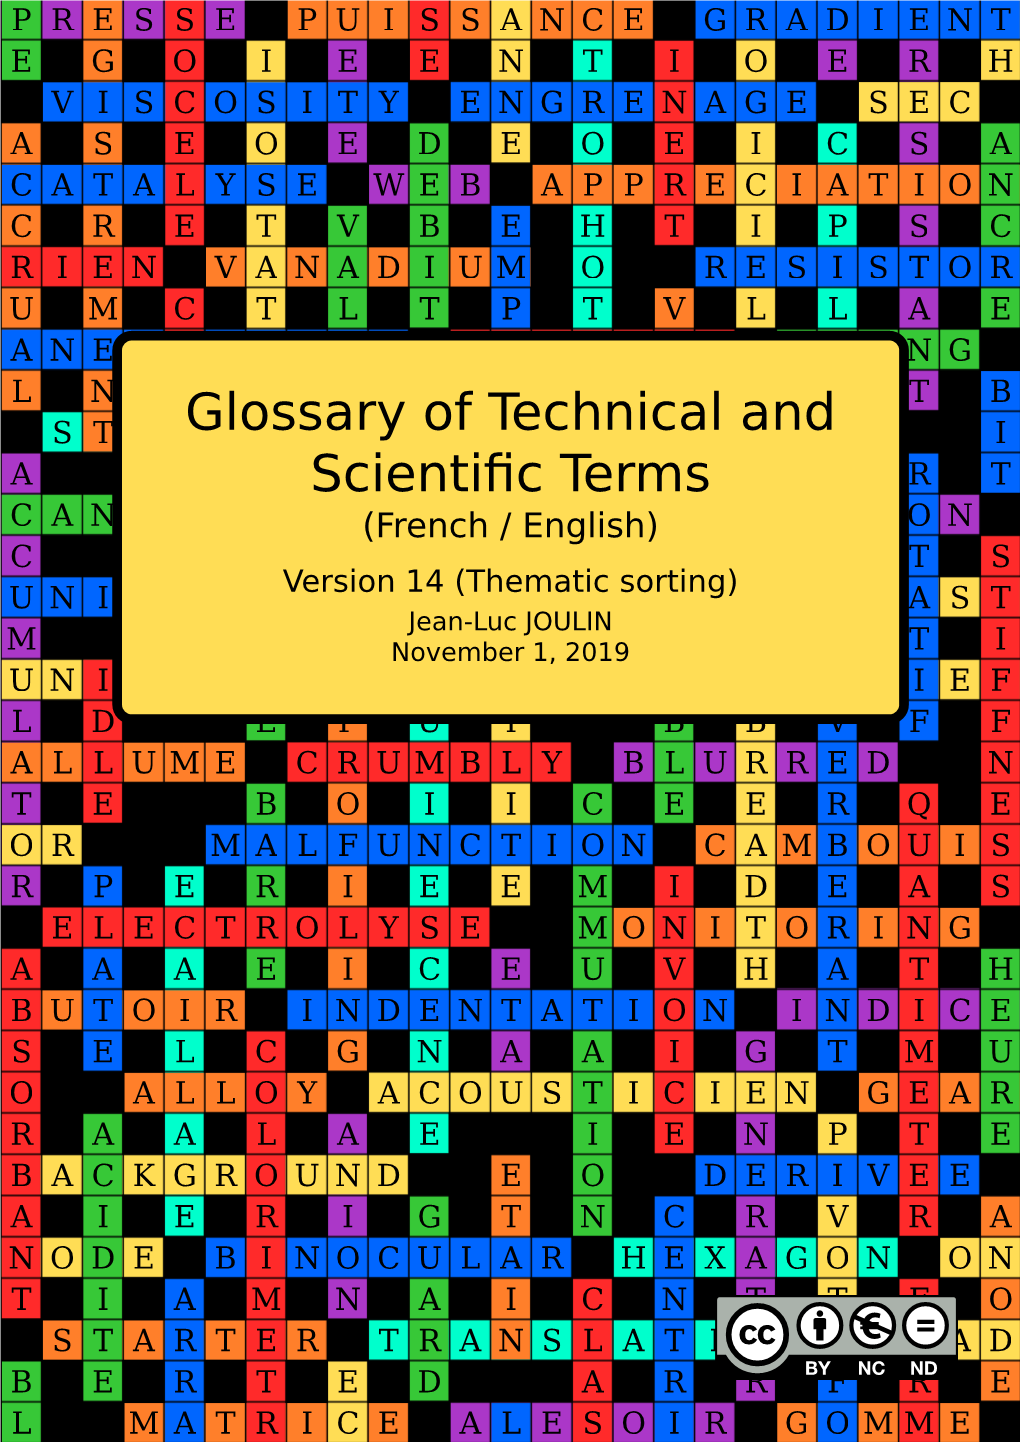 Glossary of Technical and Scientific Terms (French / English)